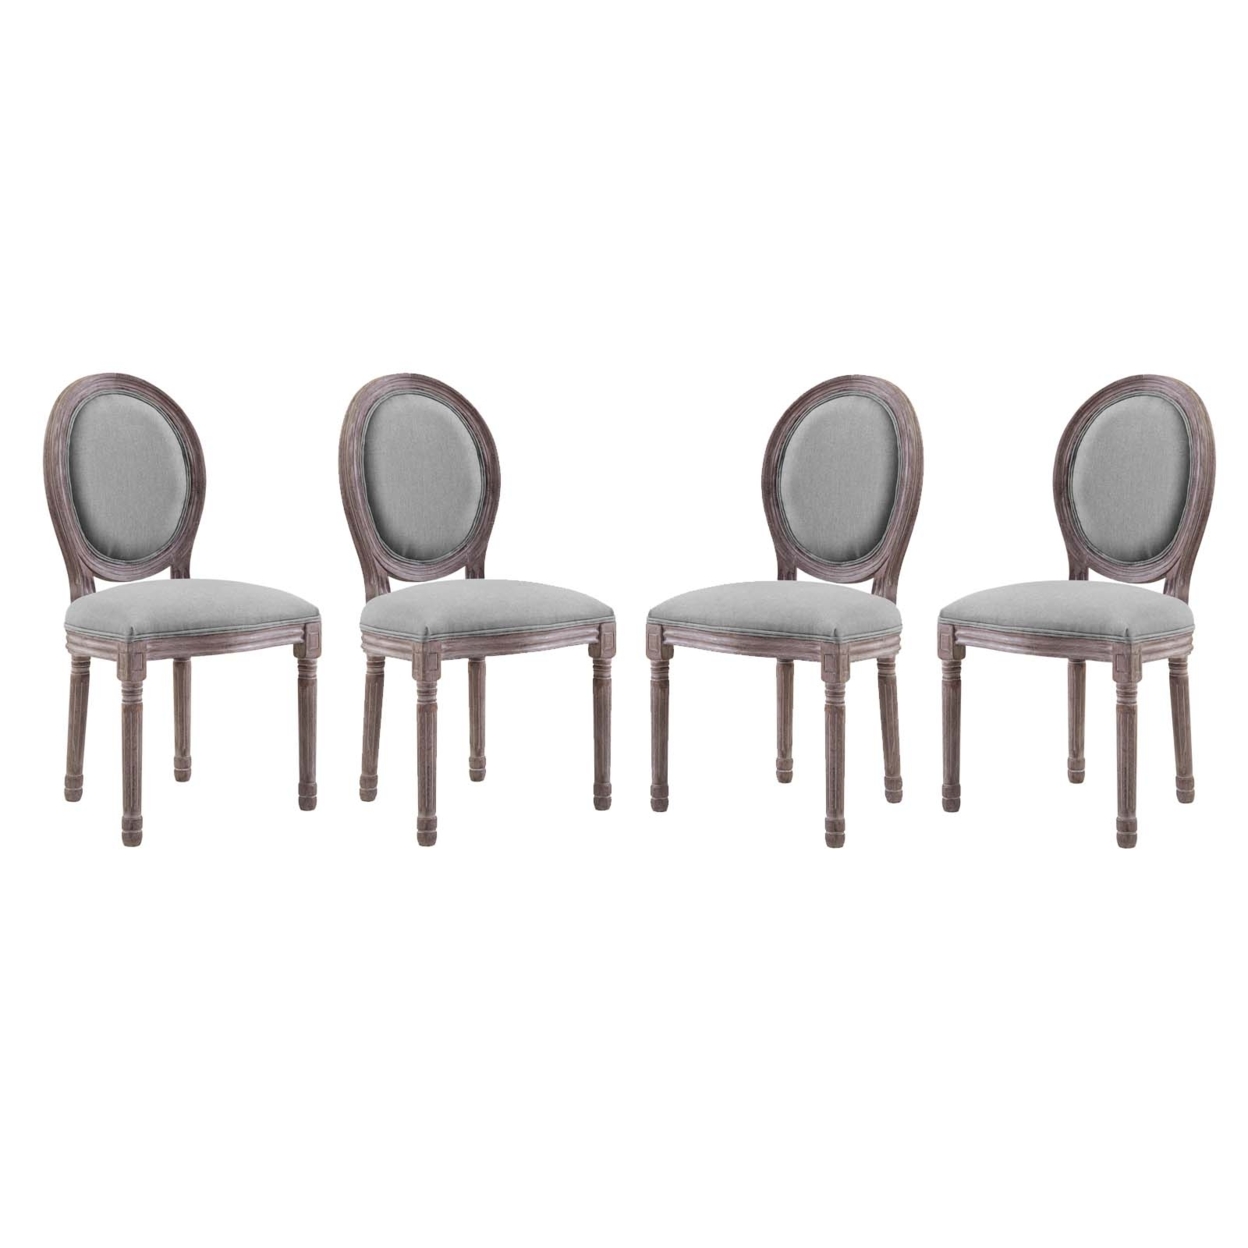 Emanate Dining Side Chair Upholstered Fabric Set Of 4,Light Gray